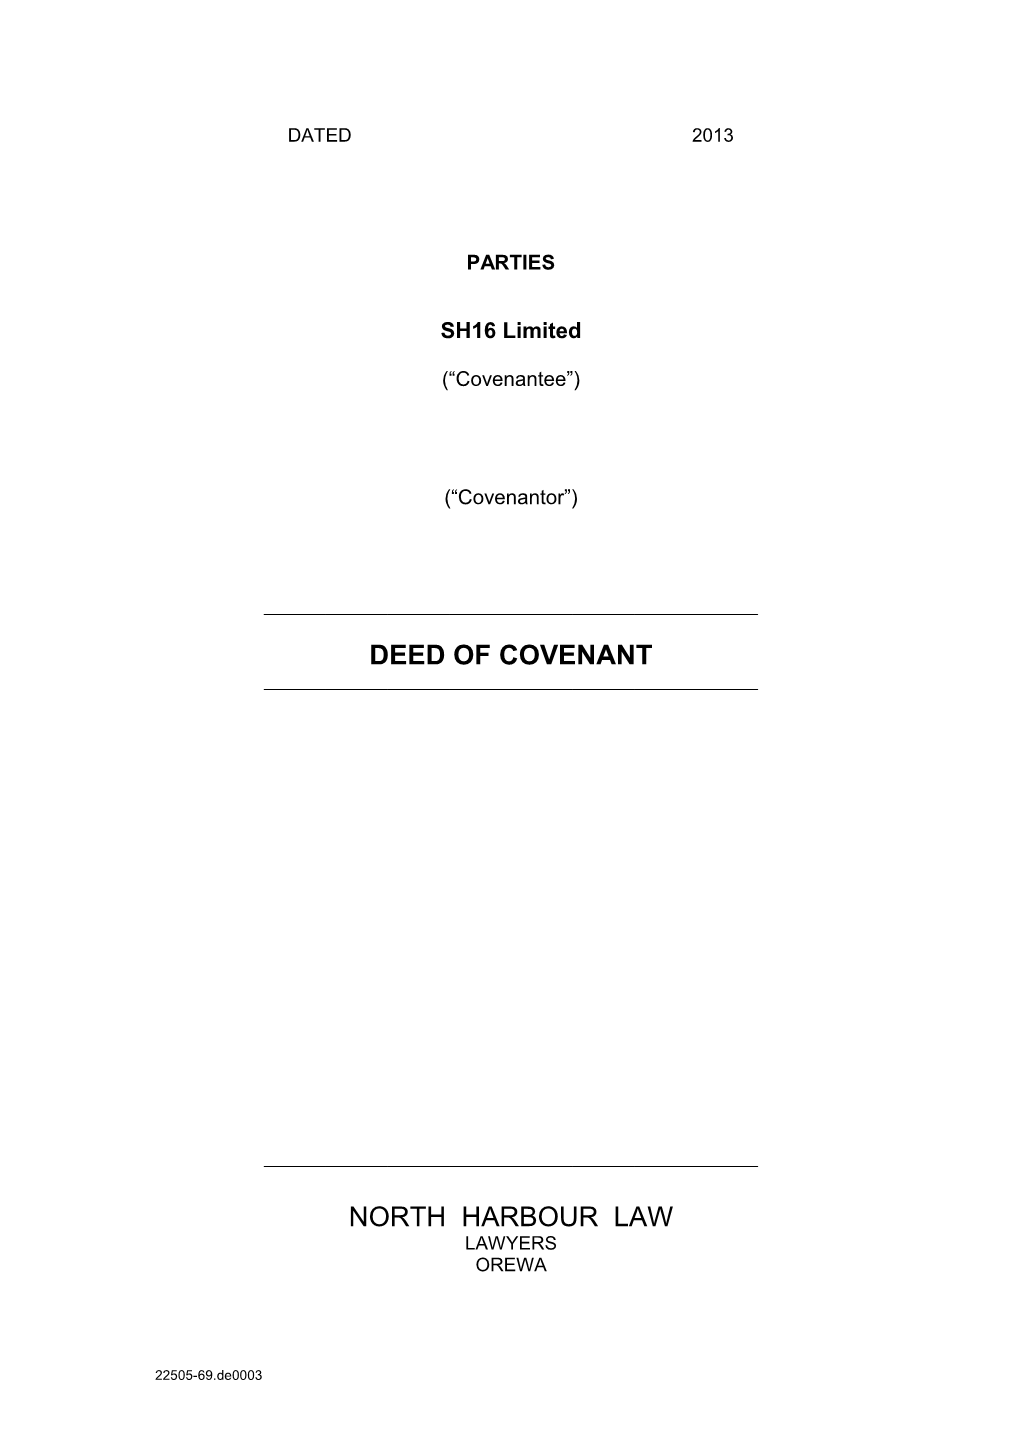 Deed of Covenant